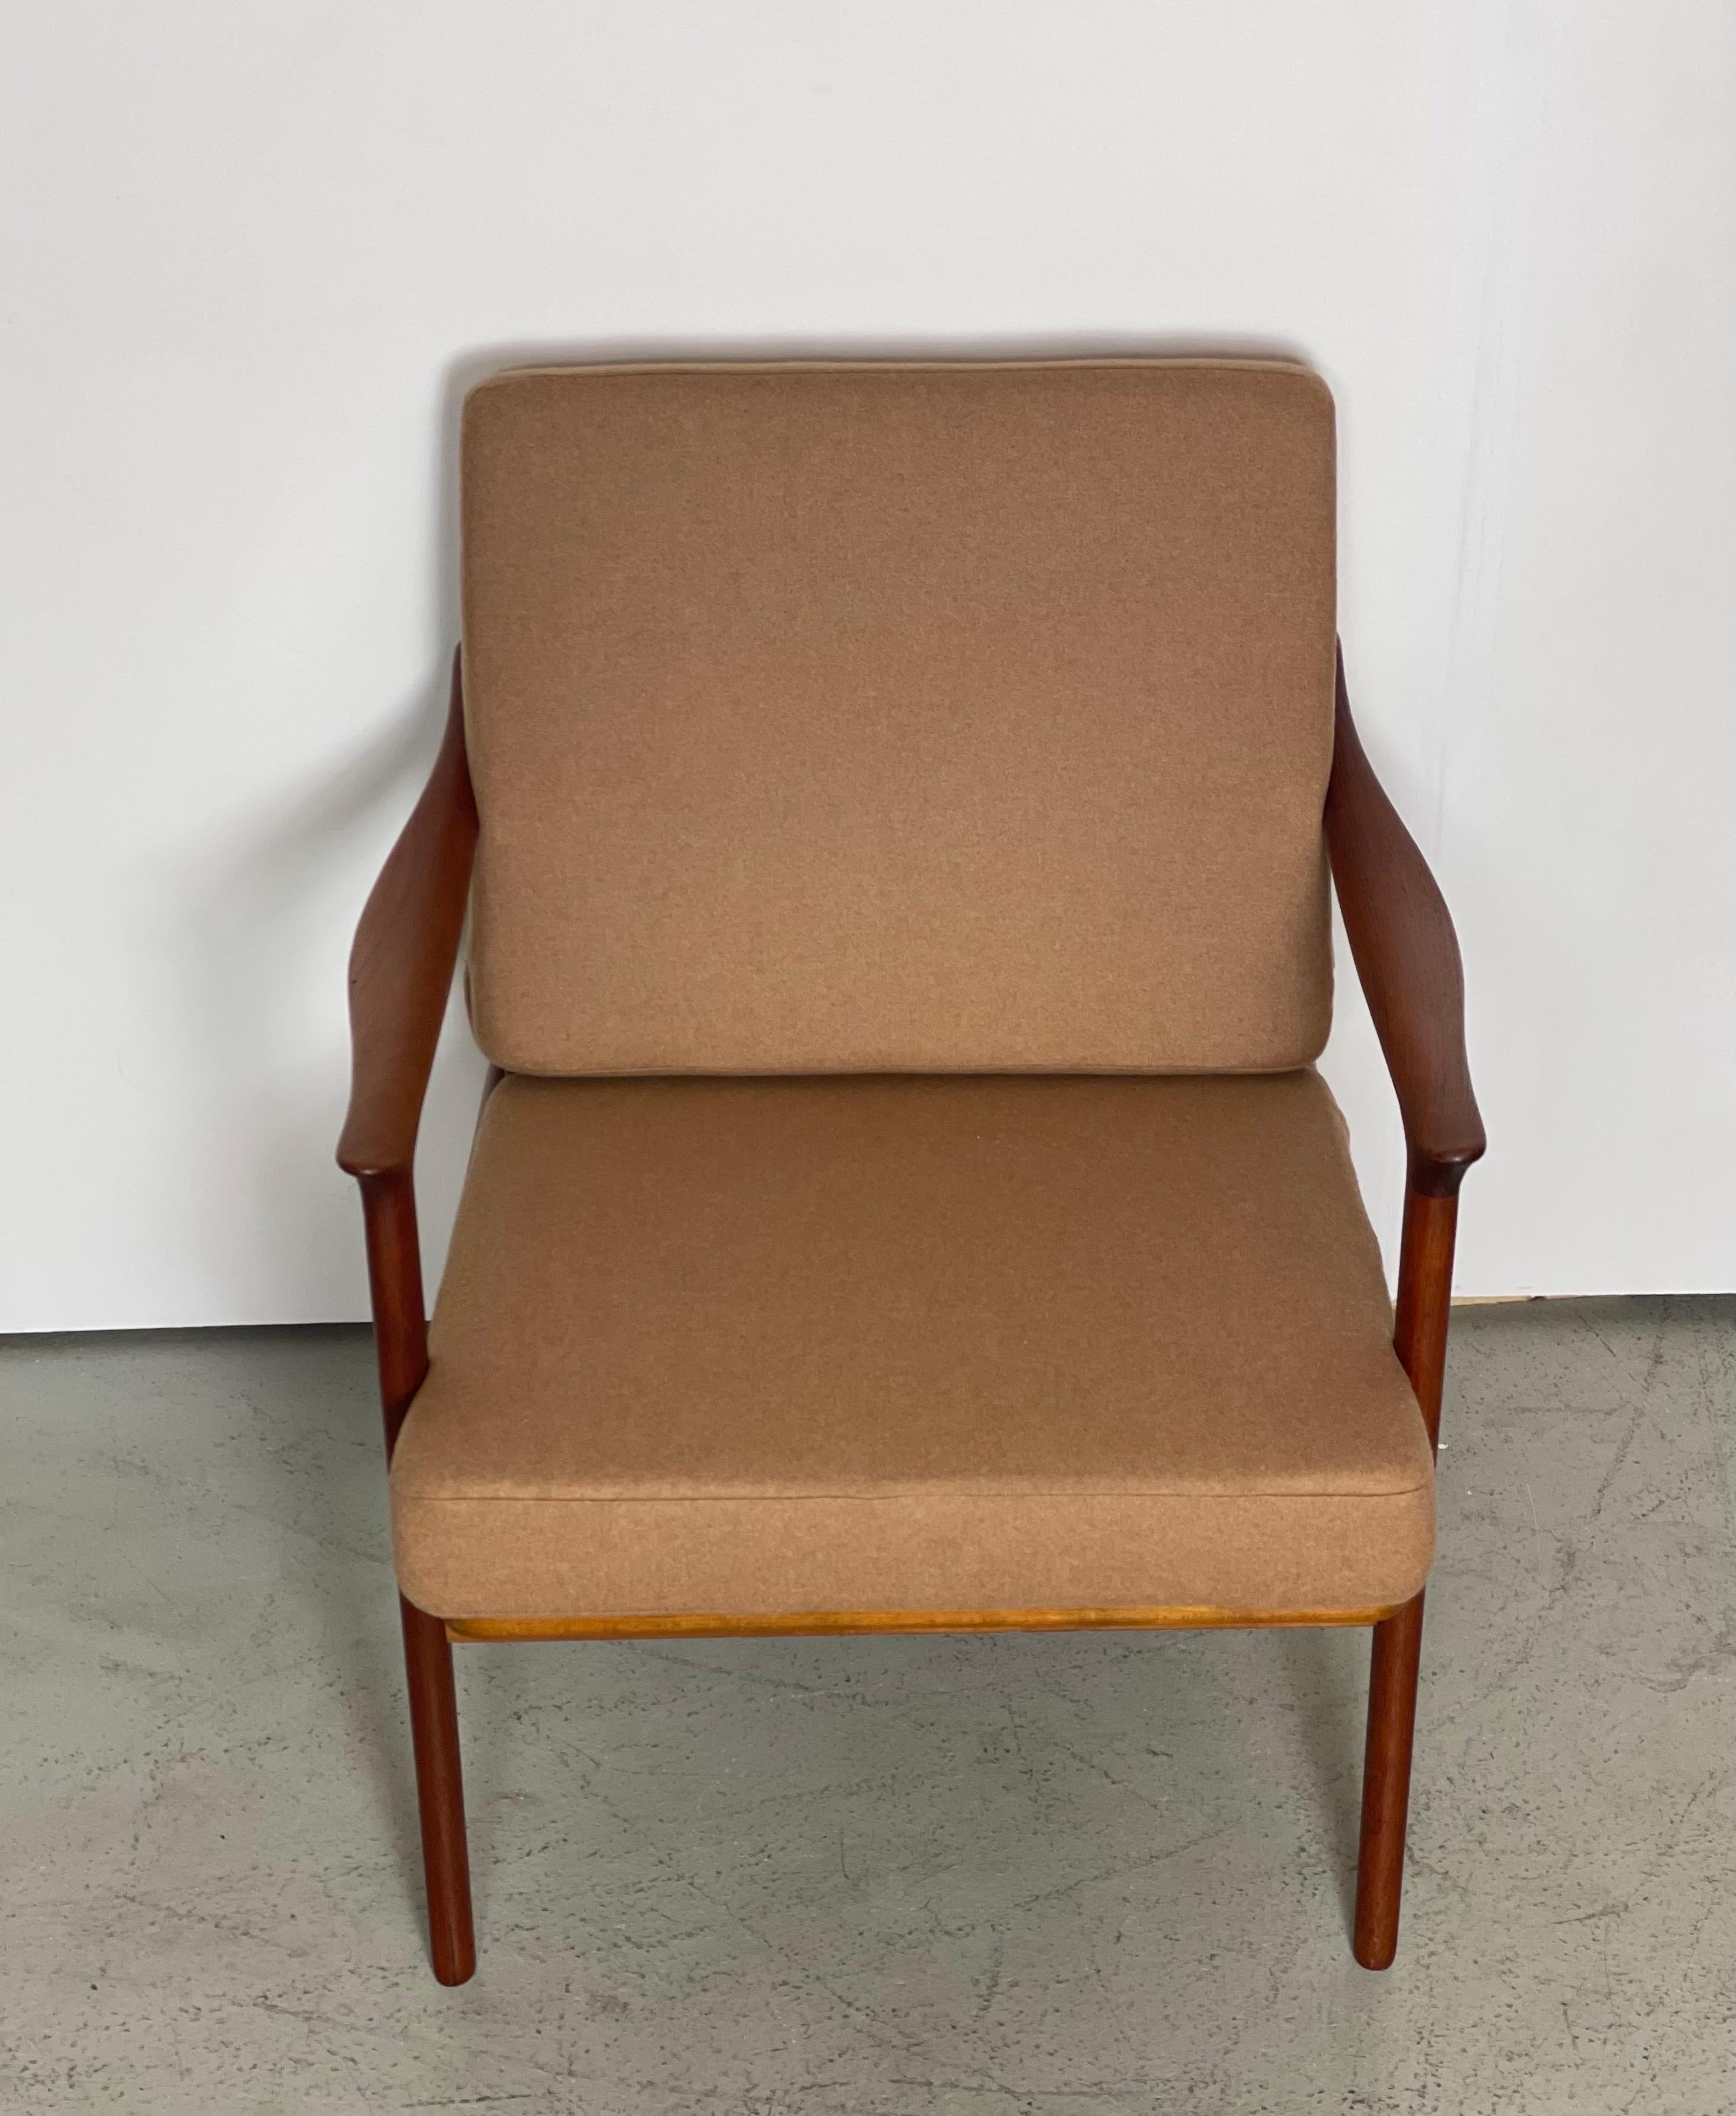 Nordic Teak Easy Chair by Fredrik A. Kayser 1950s For Sale 1